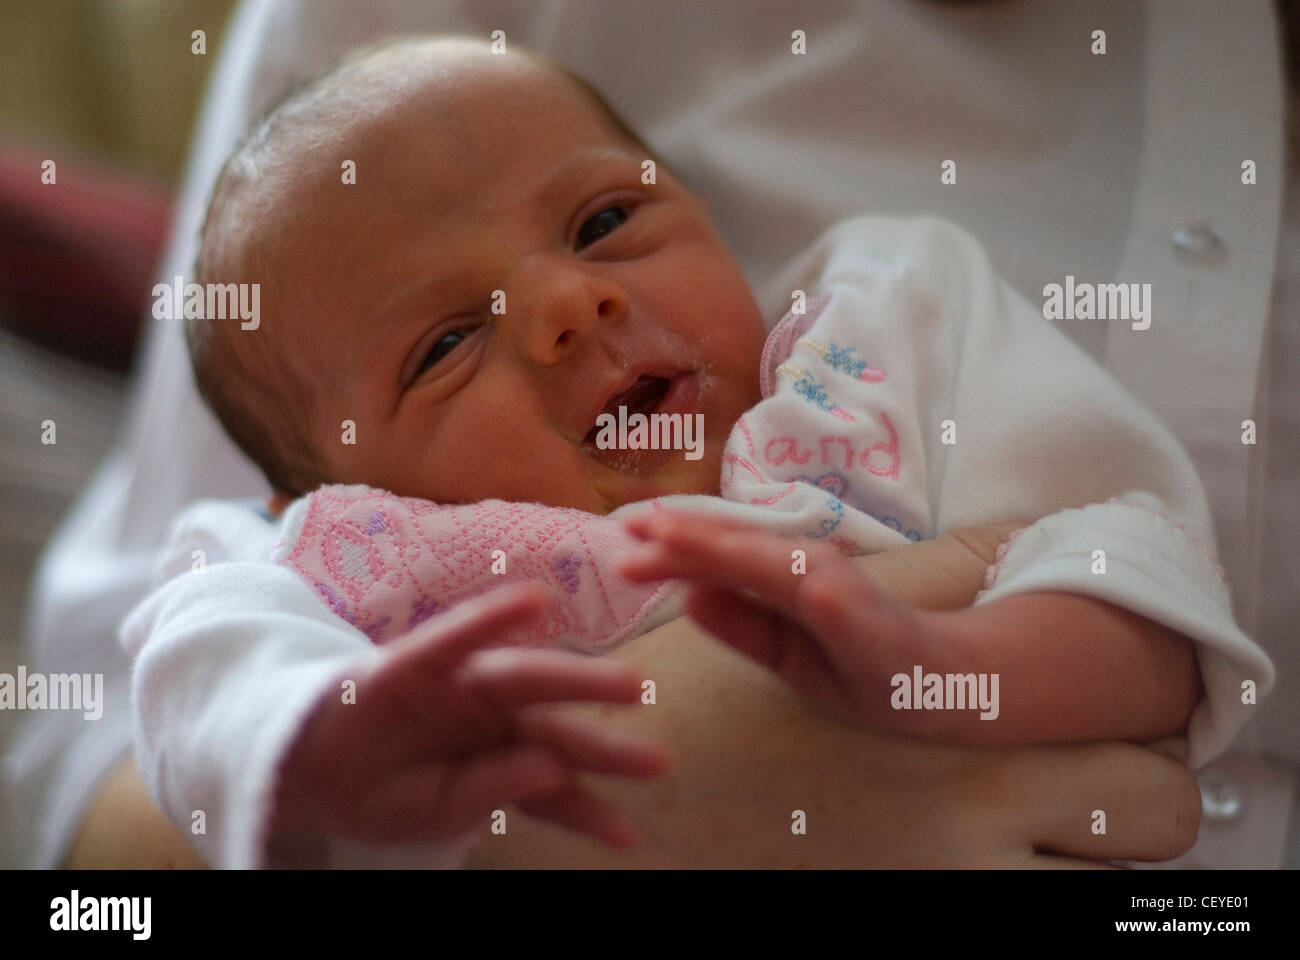 A newborn female baby dressed in a white patterned babygrow, his mouth open and looking at the camera, being held by an adult Stock Photo